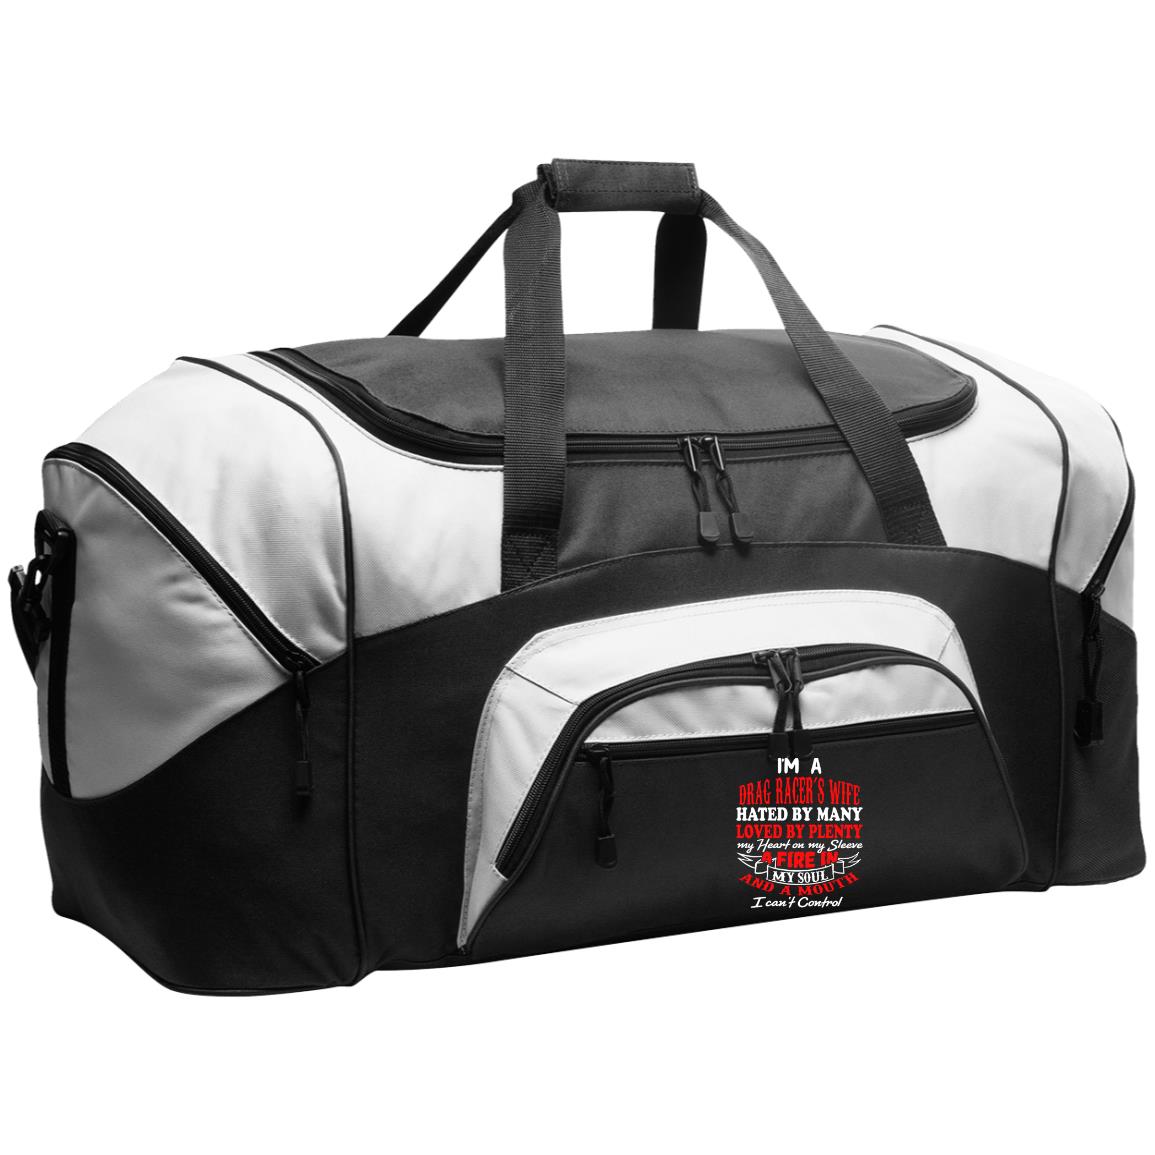 I'm A Drag Racer's Wife Hated By Many Loved By Plenty Colorblock Sport Duffel